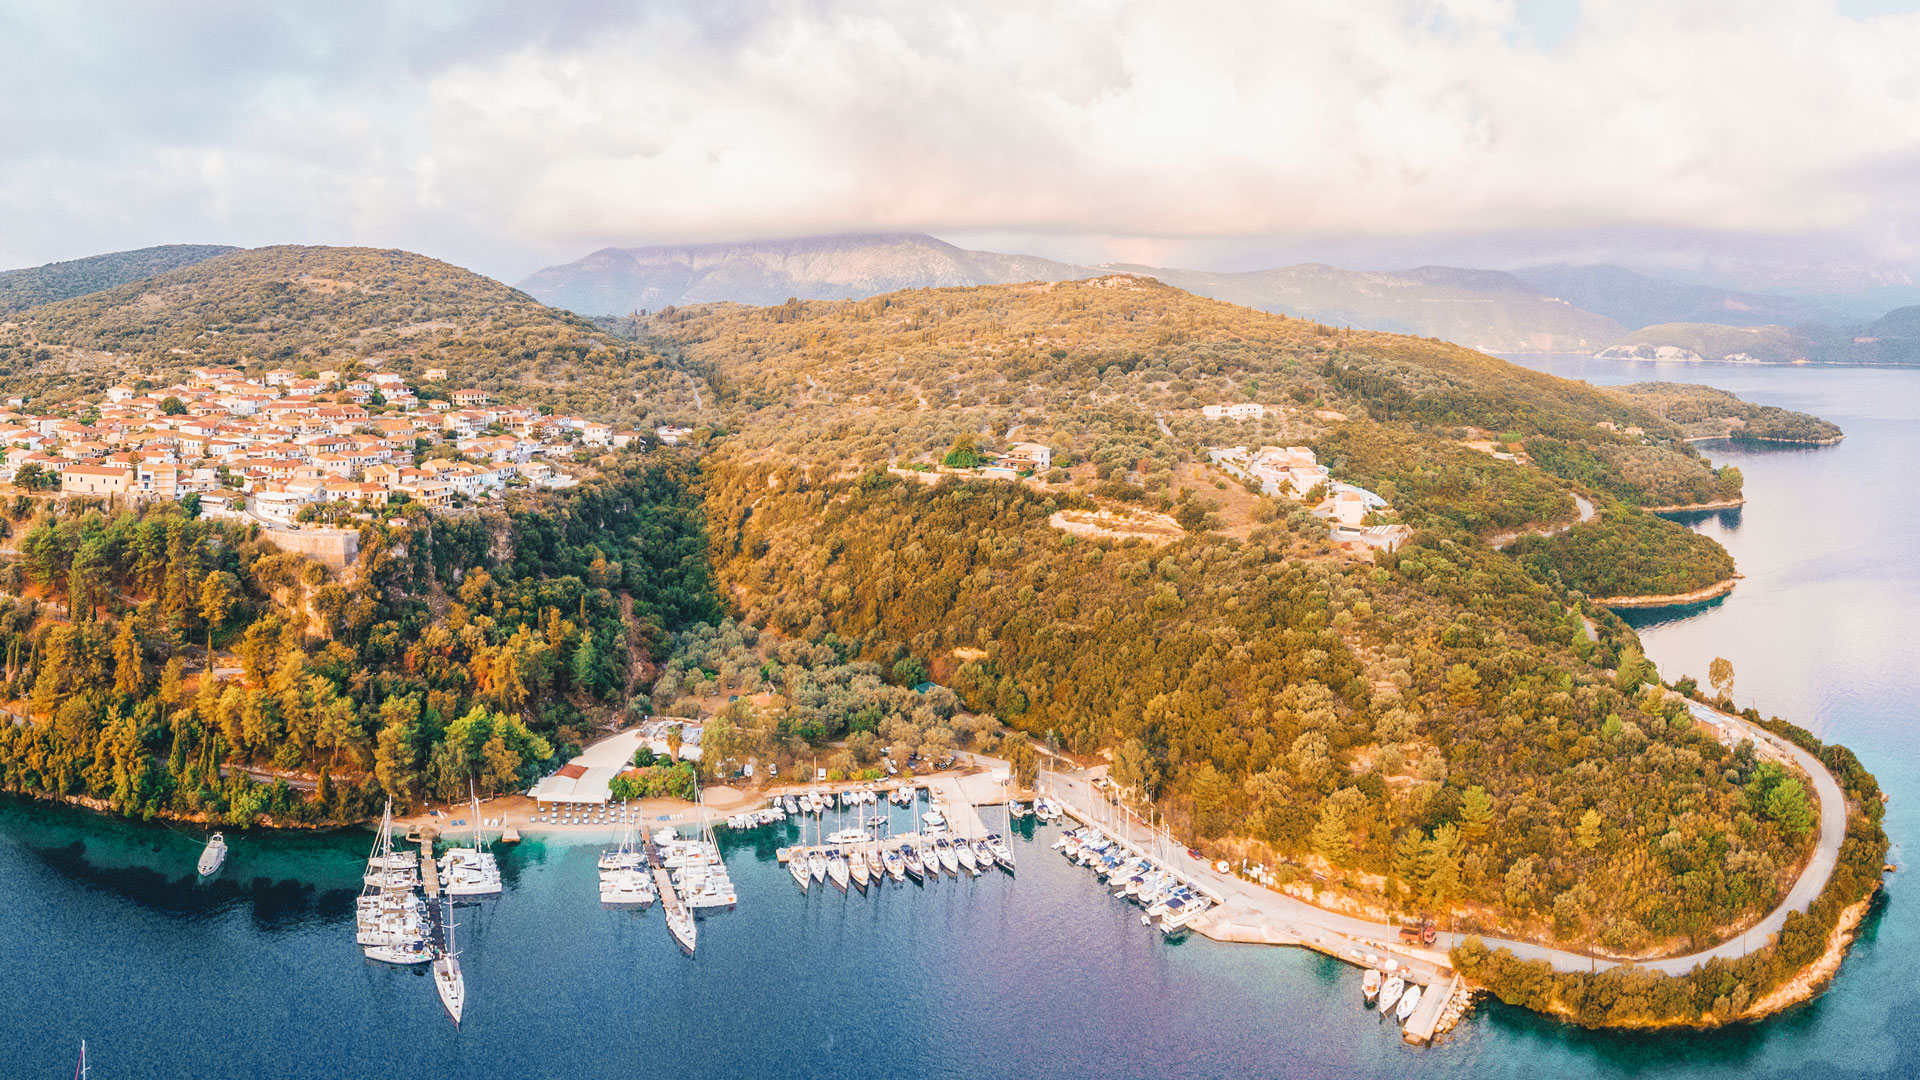 Arriving at Spartochori, you’ll find an adorable little port with fishing and sailing boats